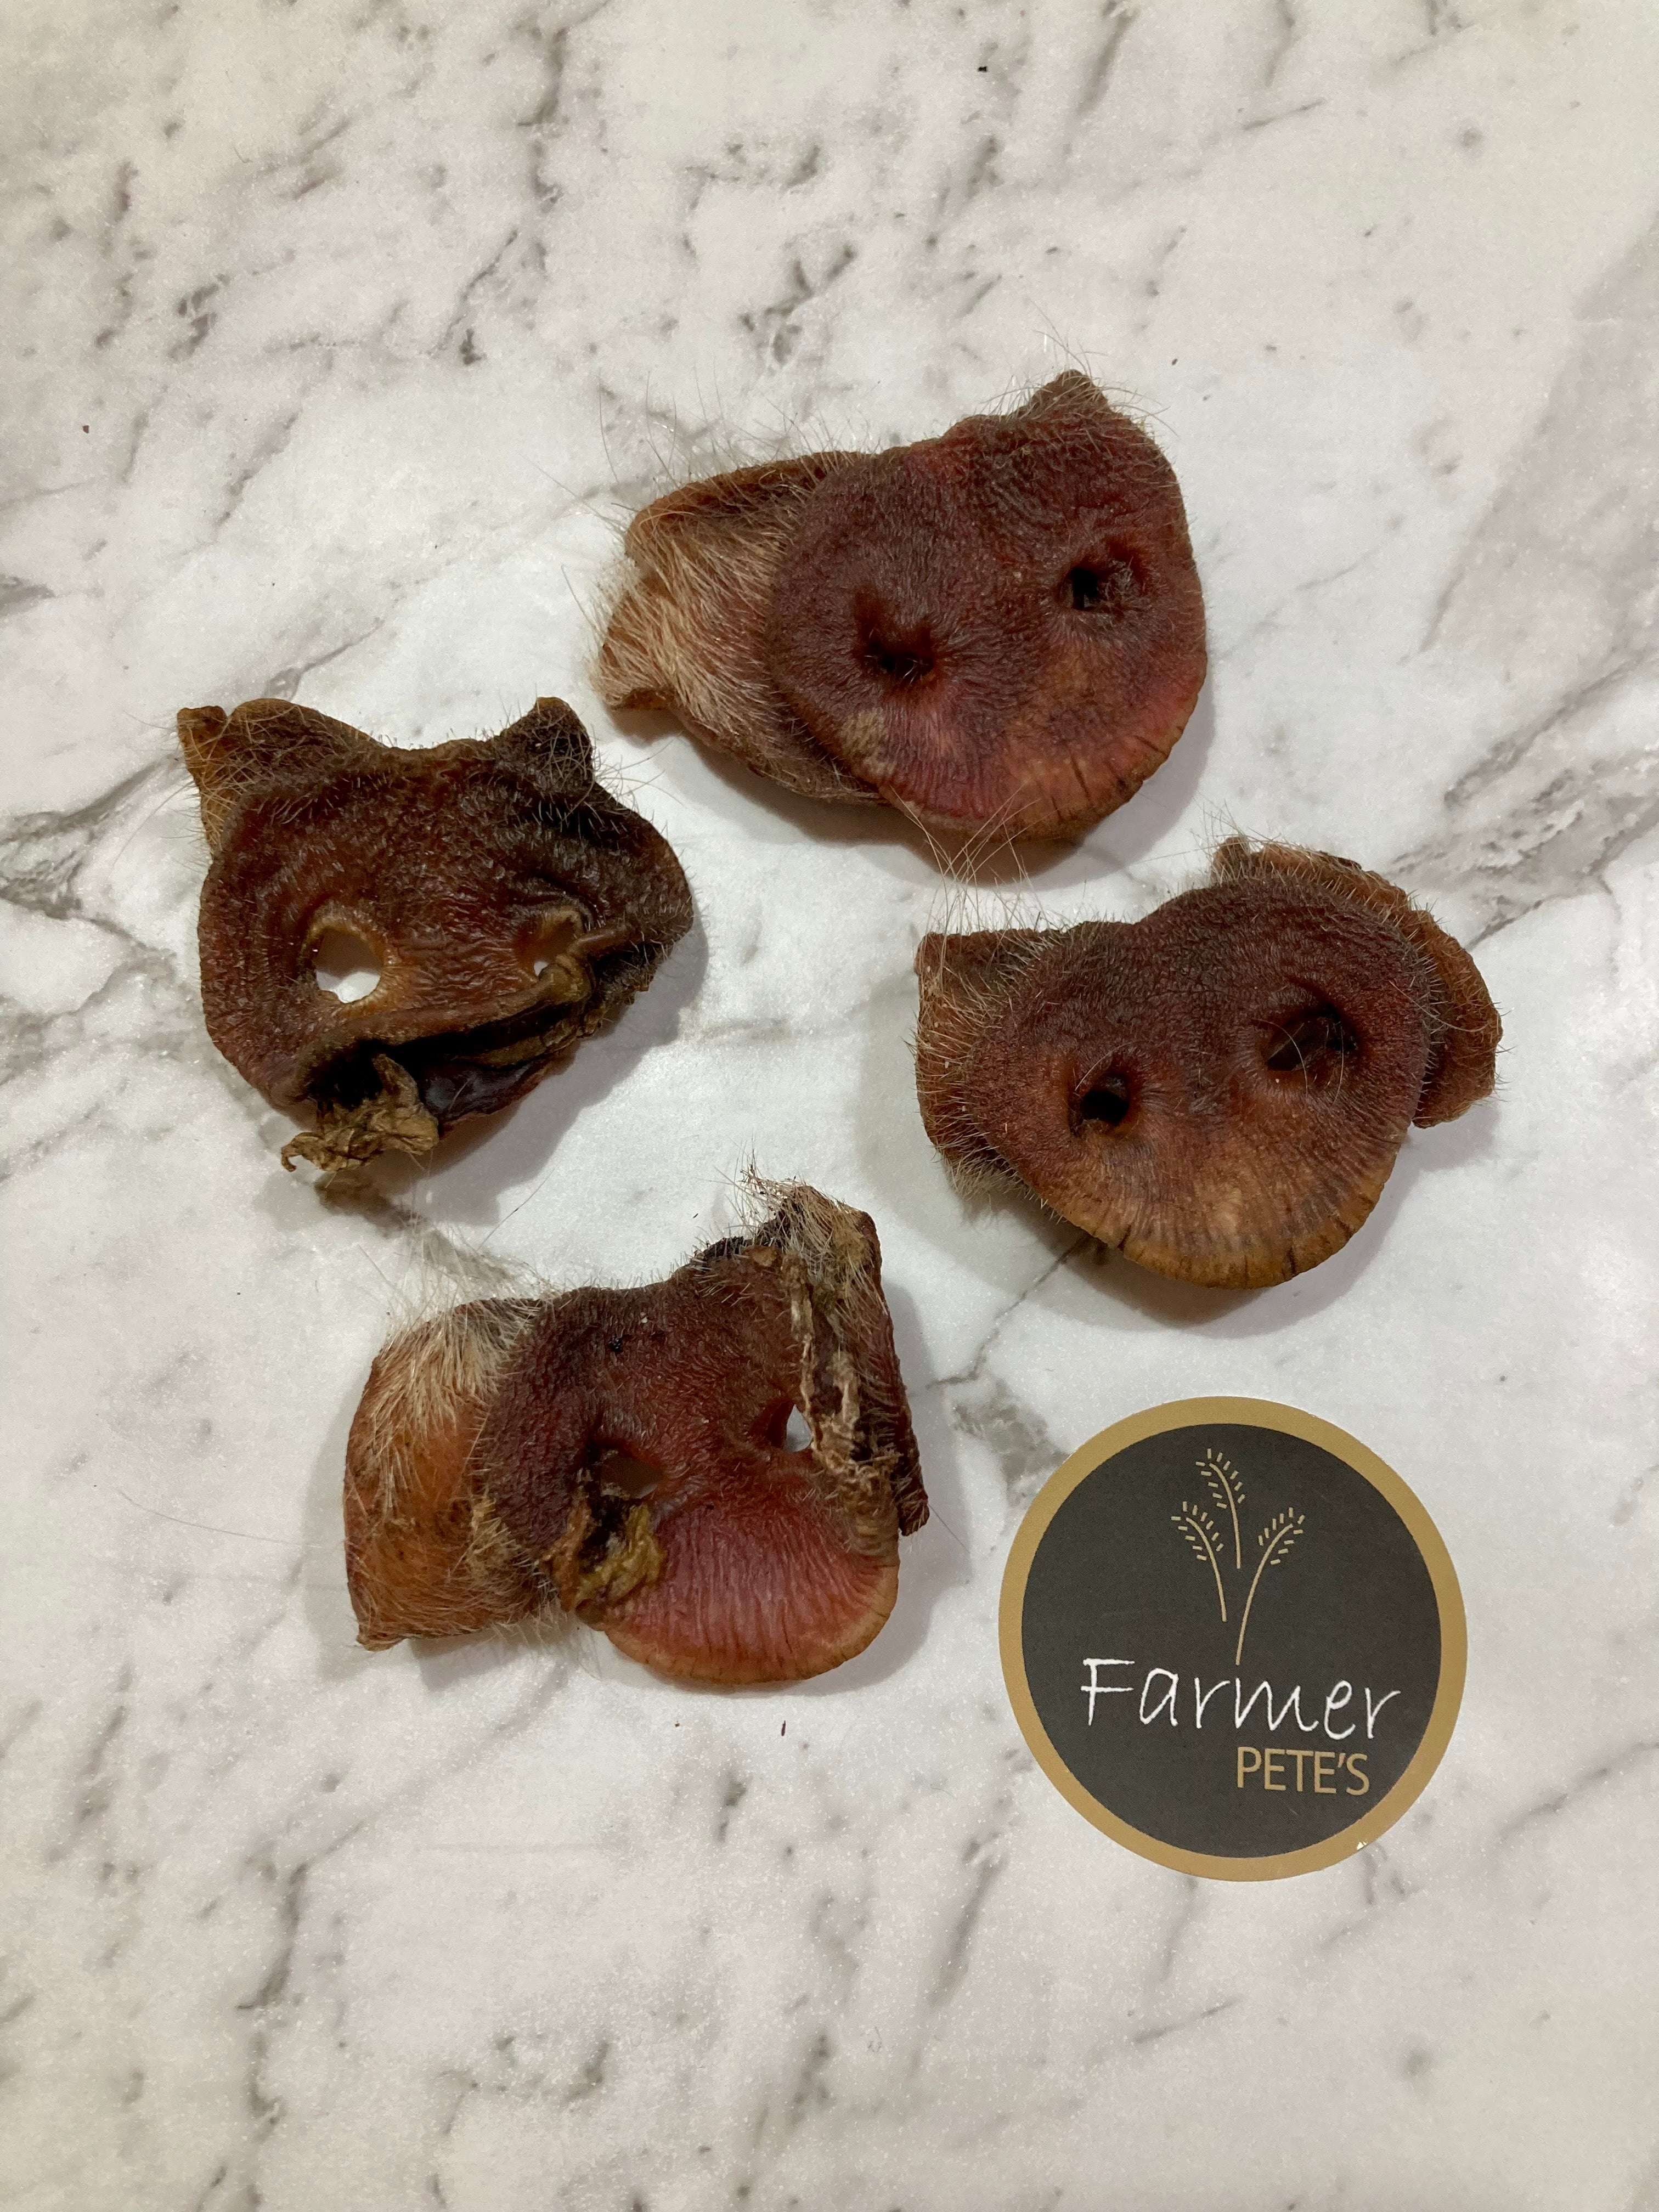 Dried Pig Snouts great natural treats for dogs, Australian pet treat products by Farmer Pete's